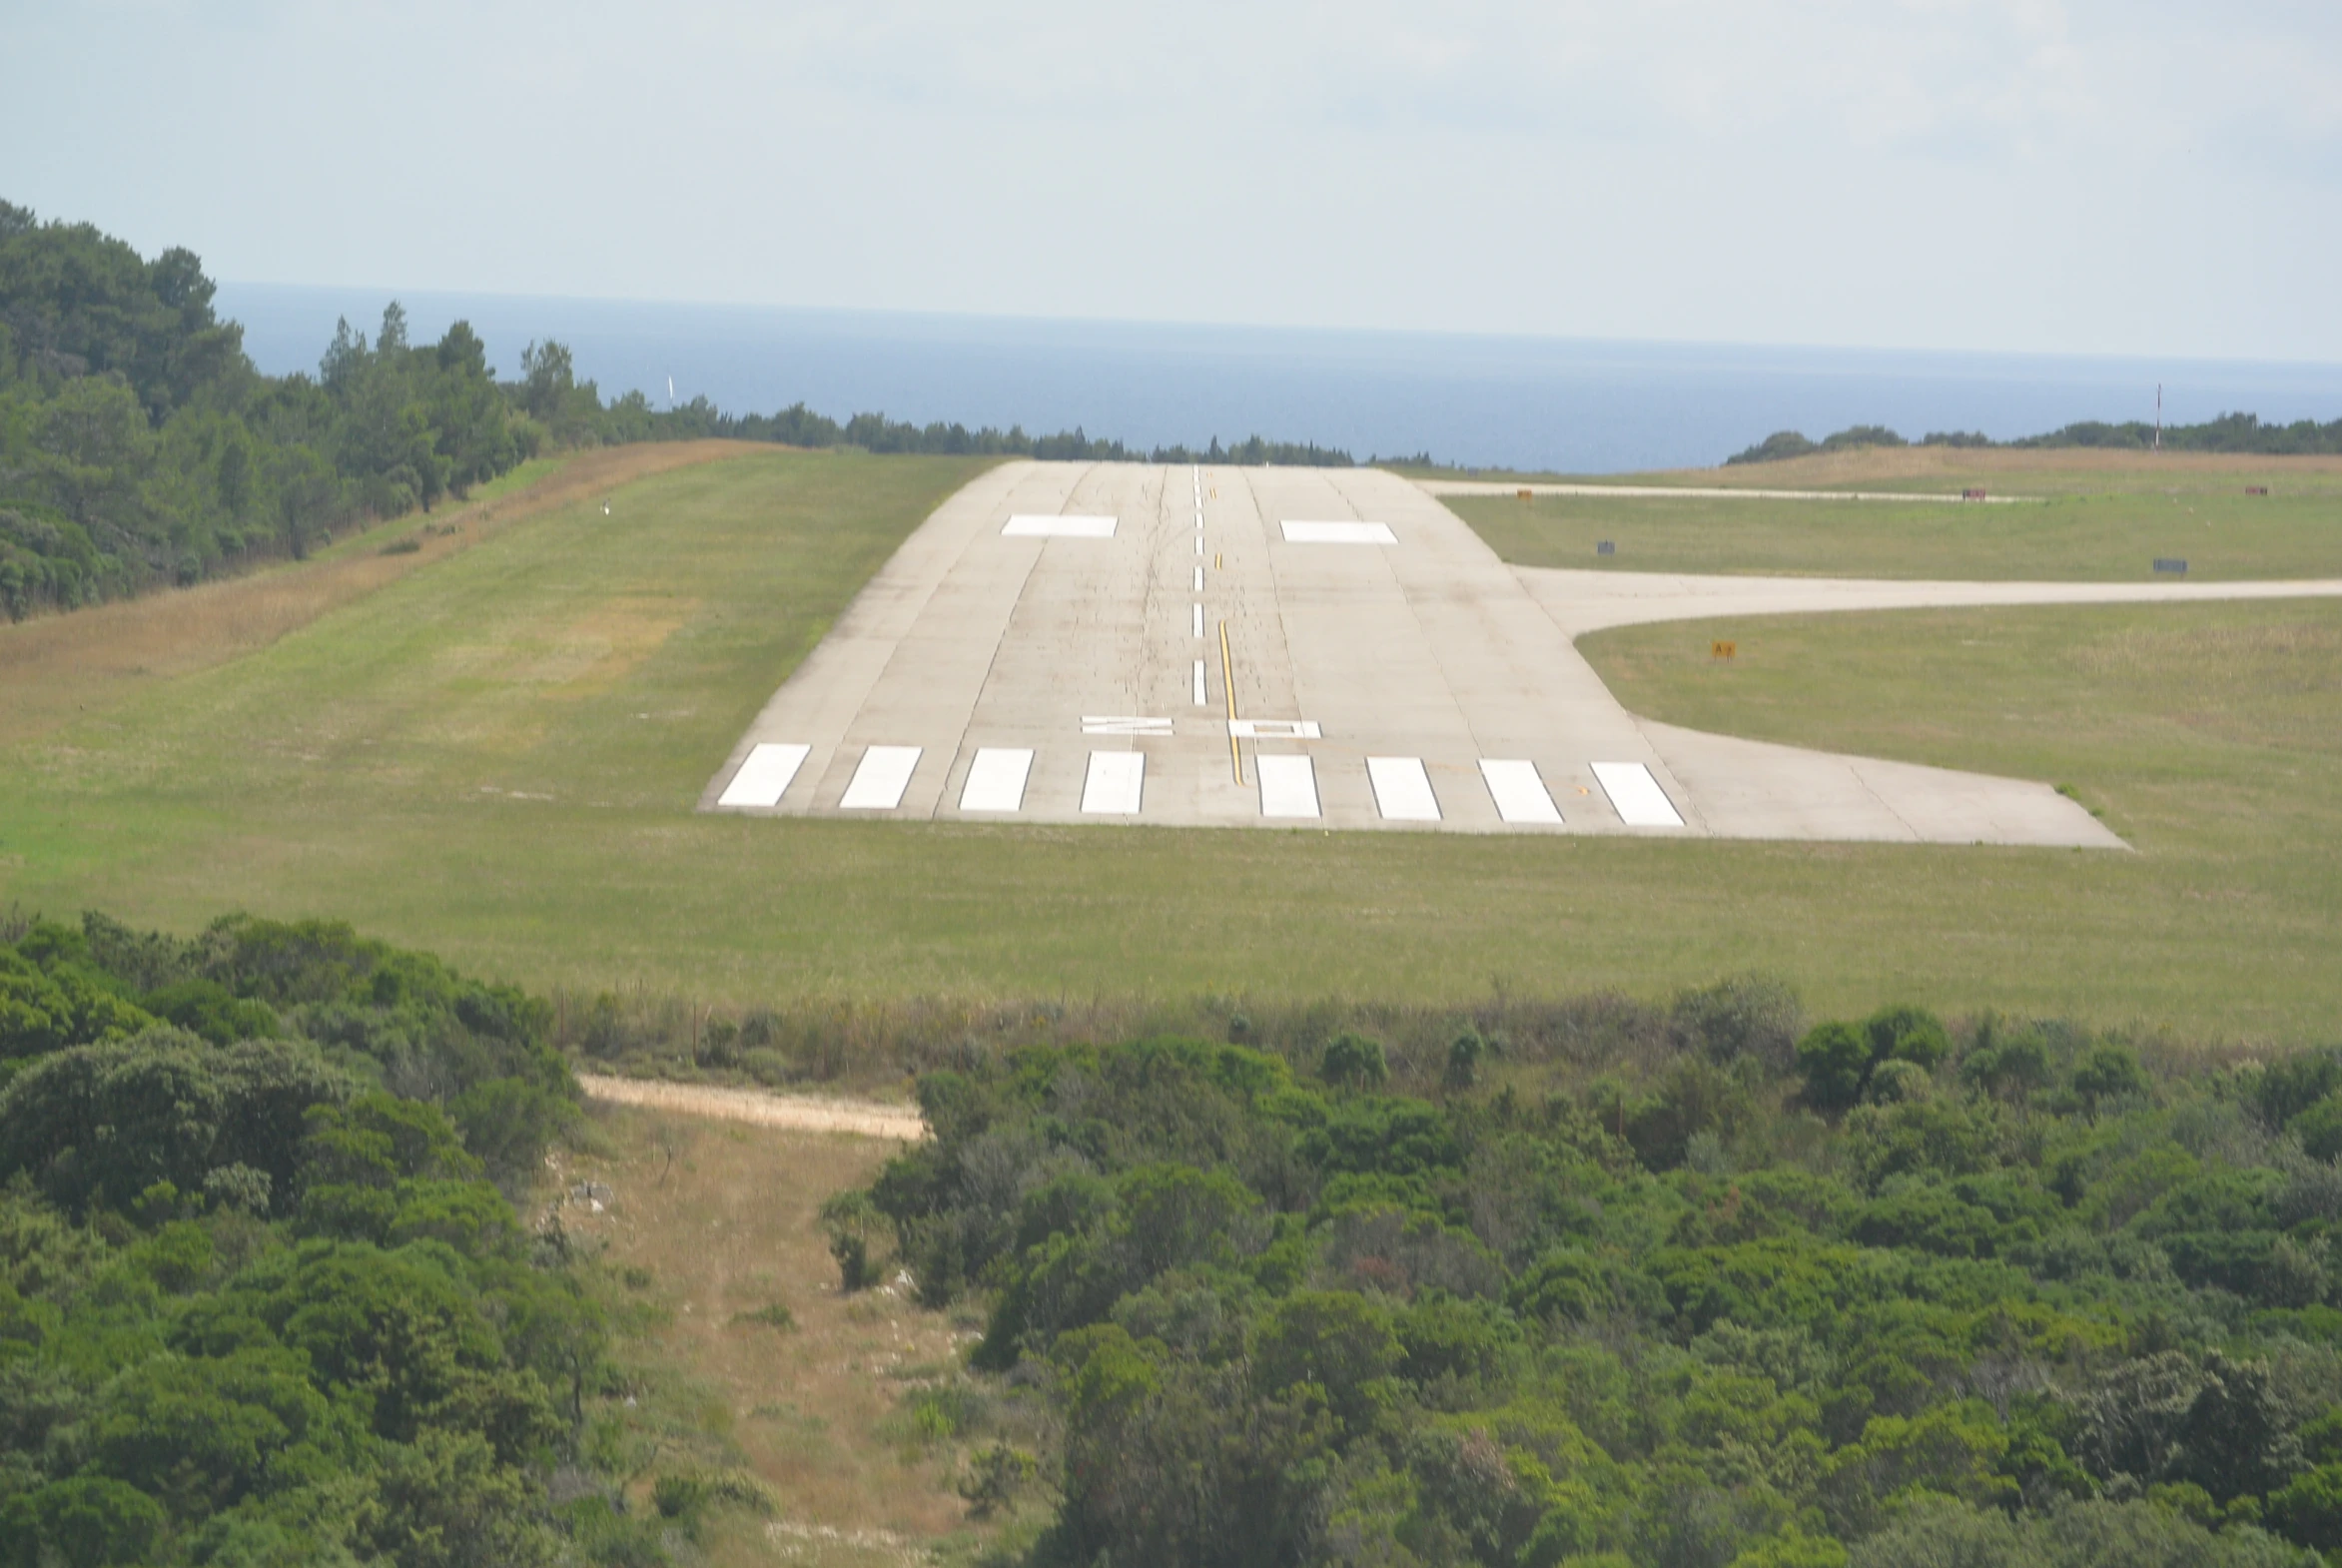 an airplane parked on an airport runway